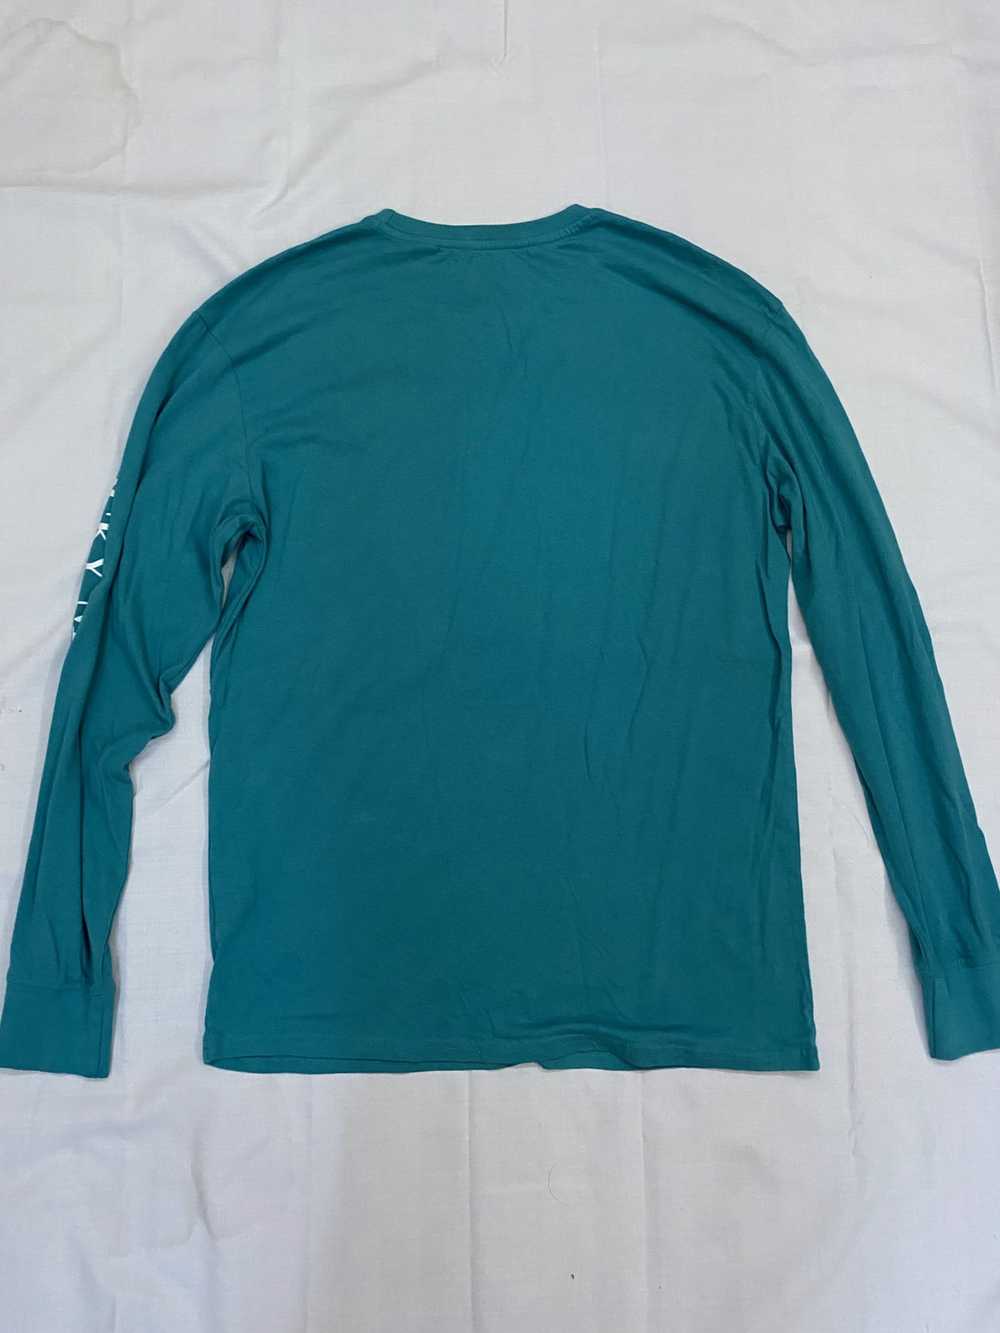 Pacsun Rocky Mountains Long Sleeve T-Shirt - image 6